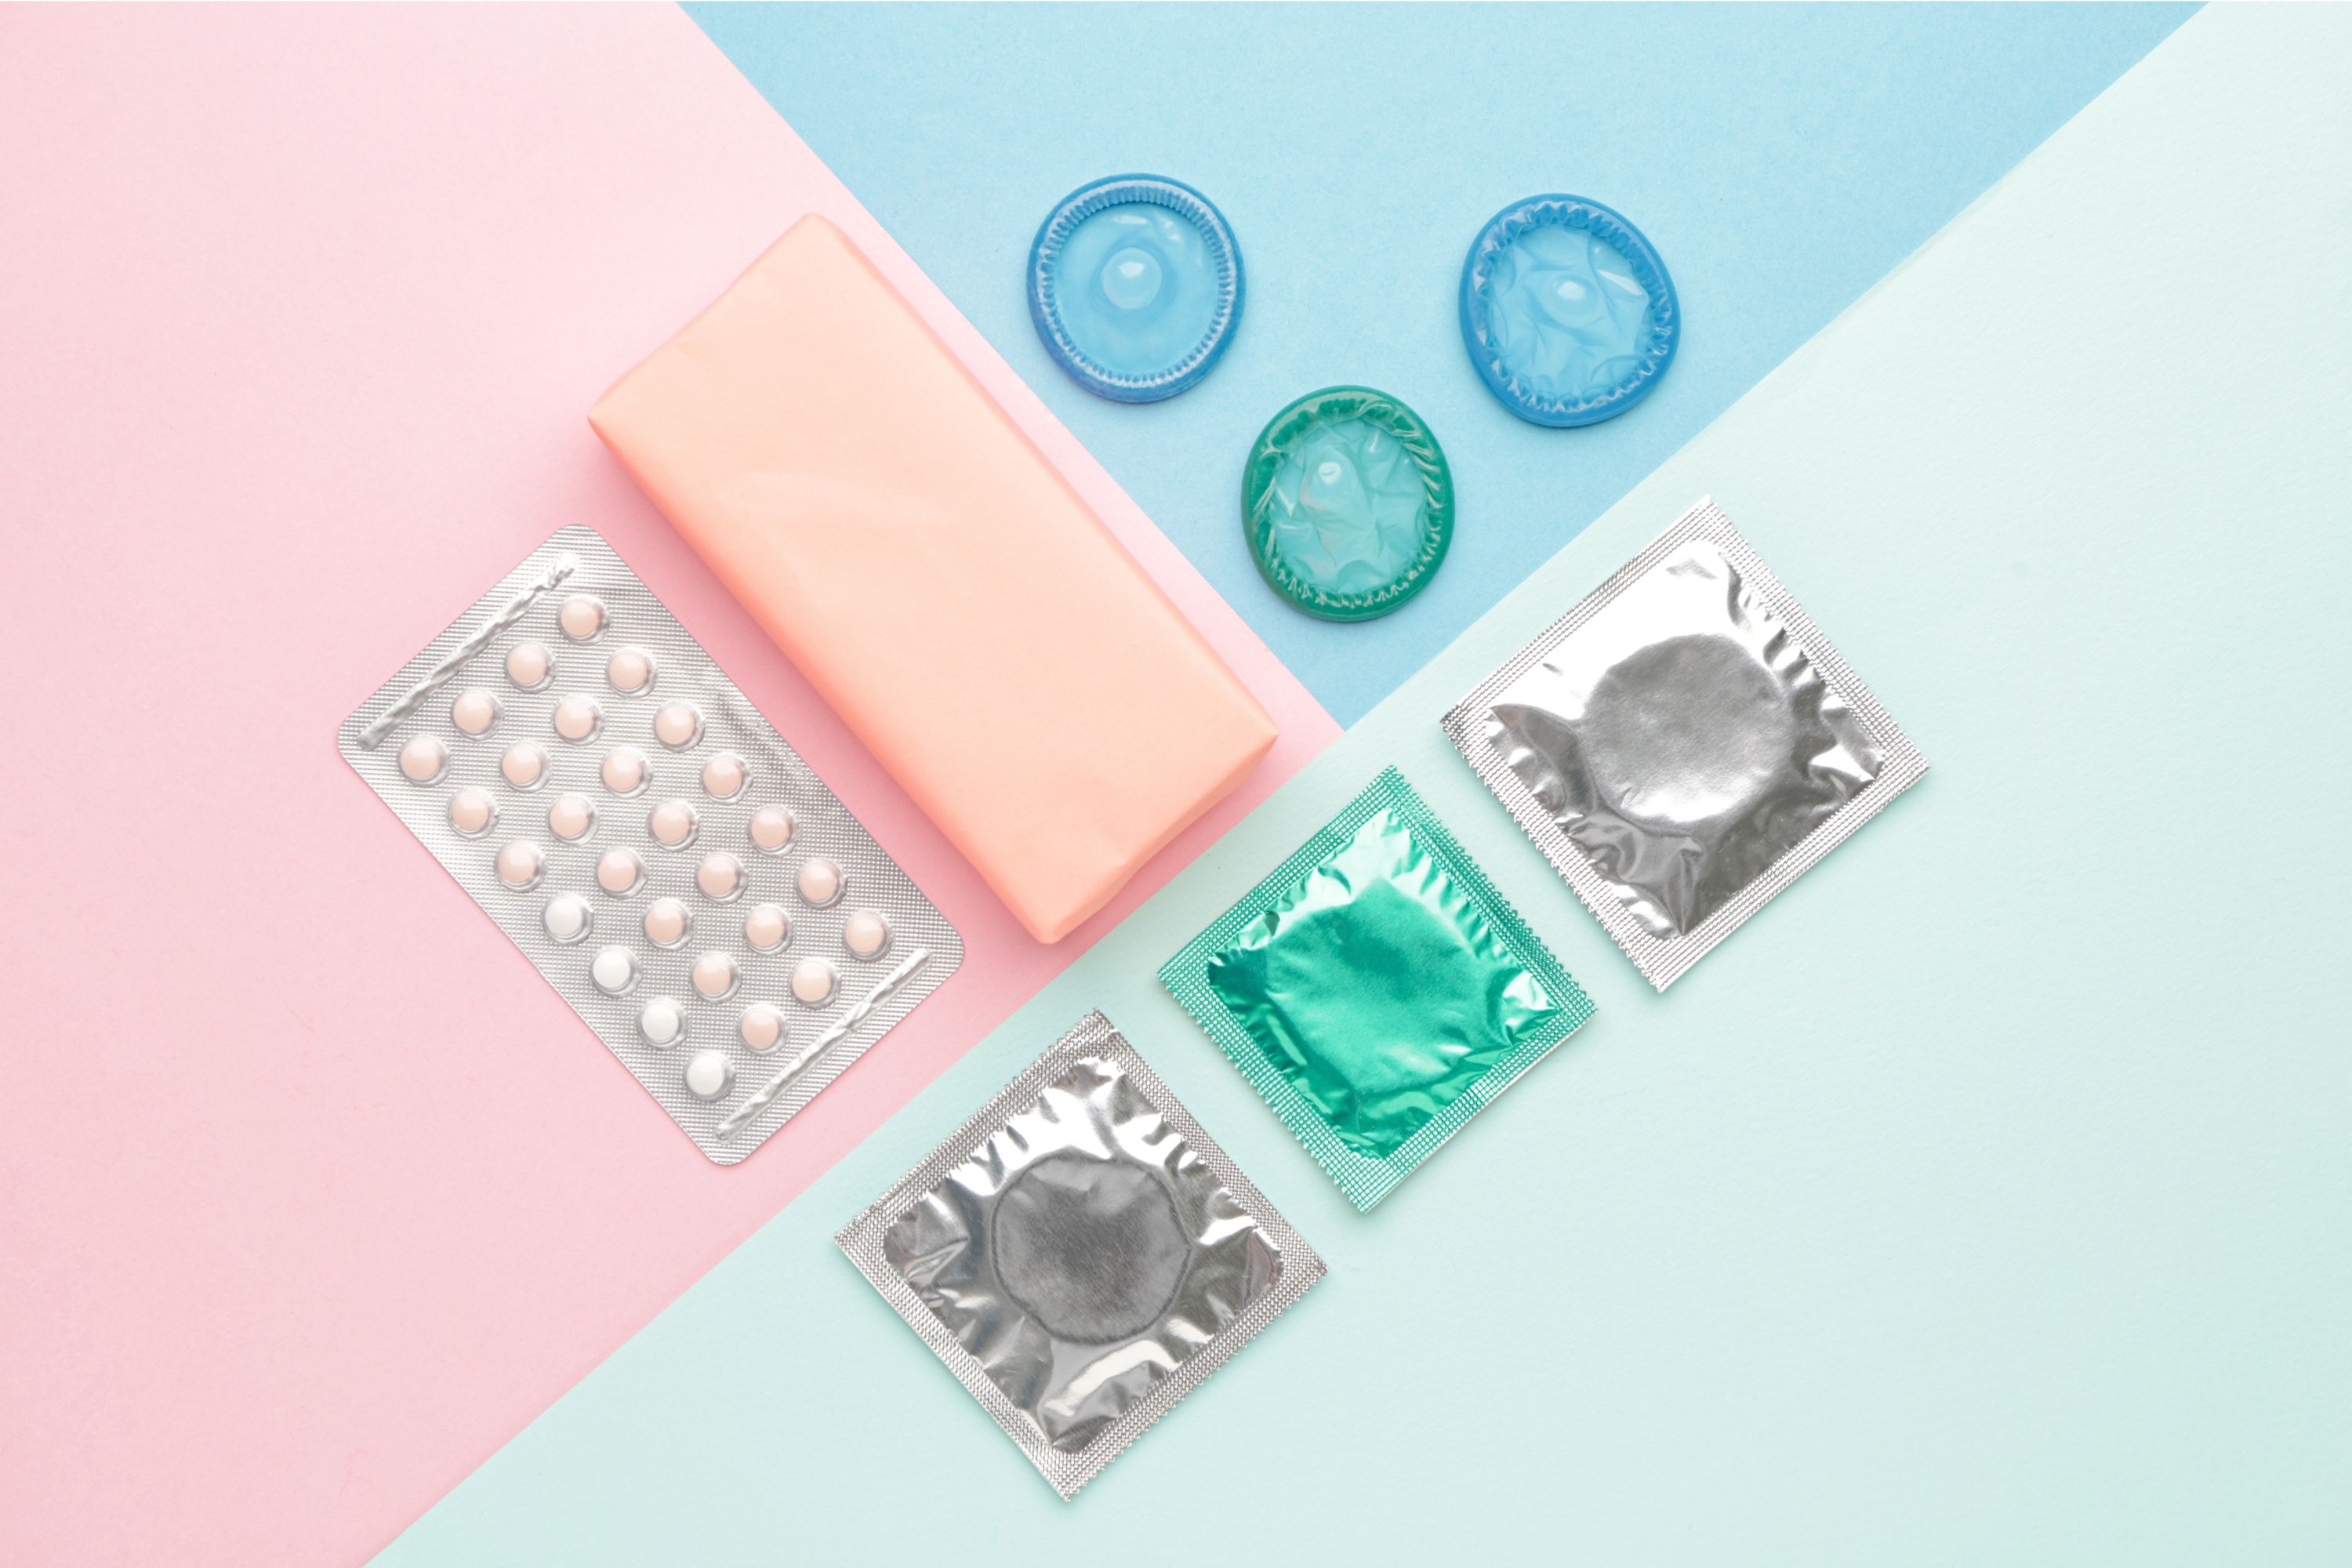 photo of a packet of contraceptive pills, and various condoms, photographed from above on a pastel-coloured background